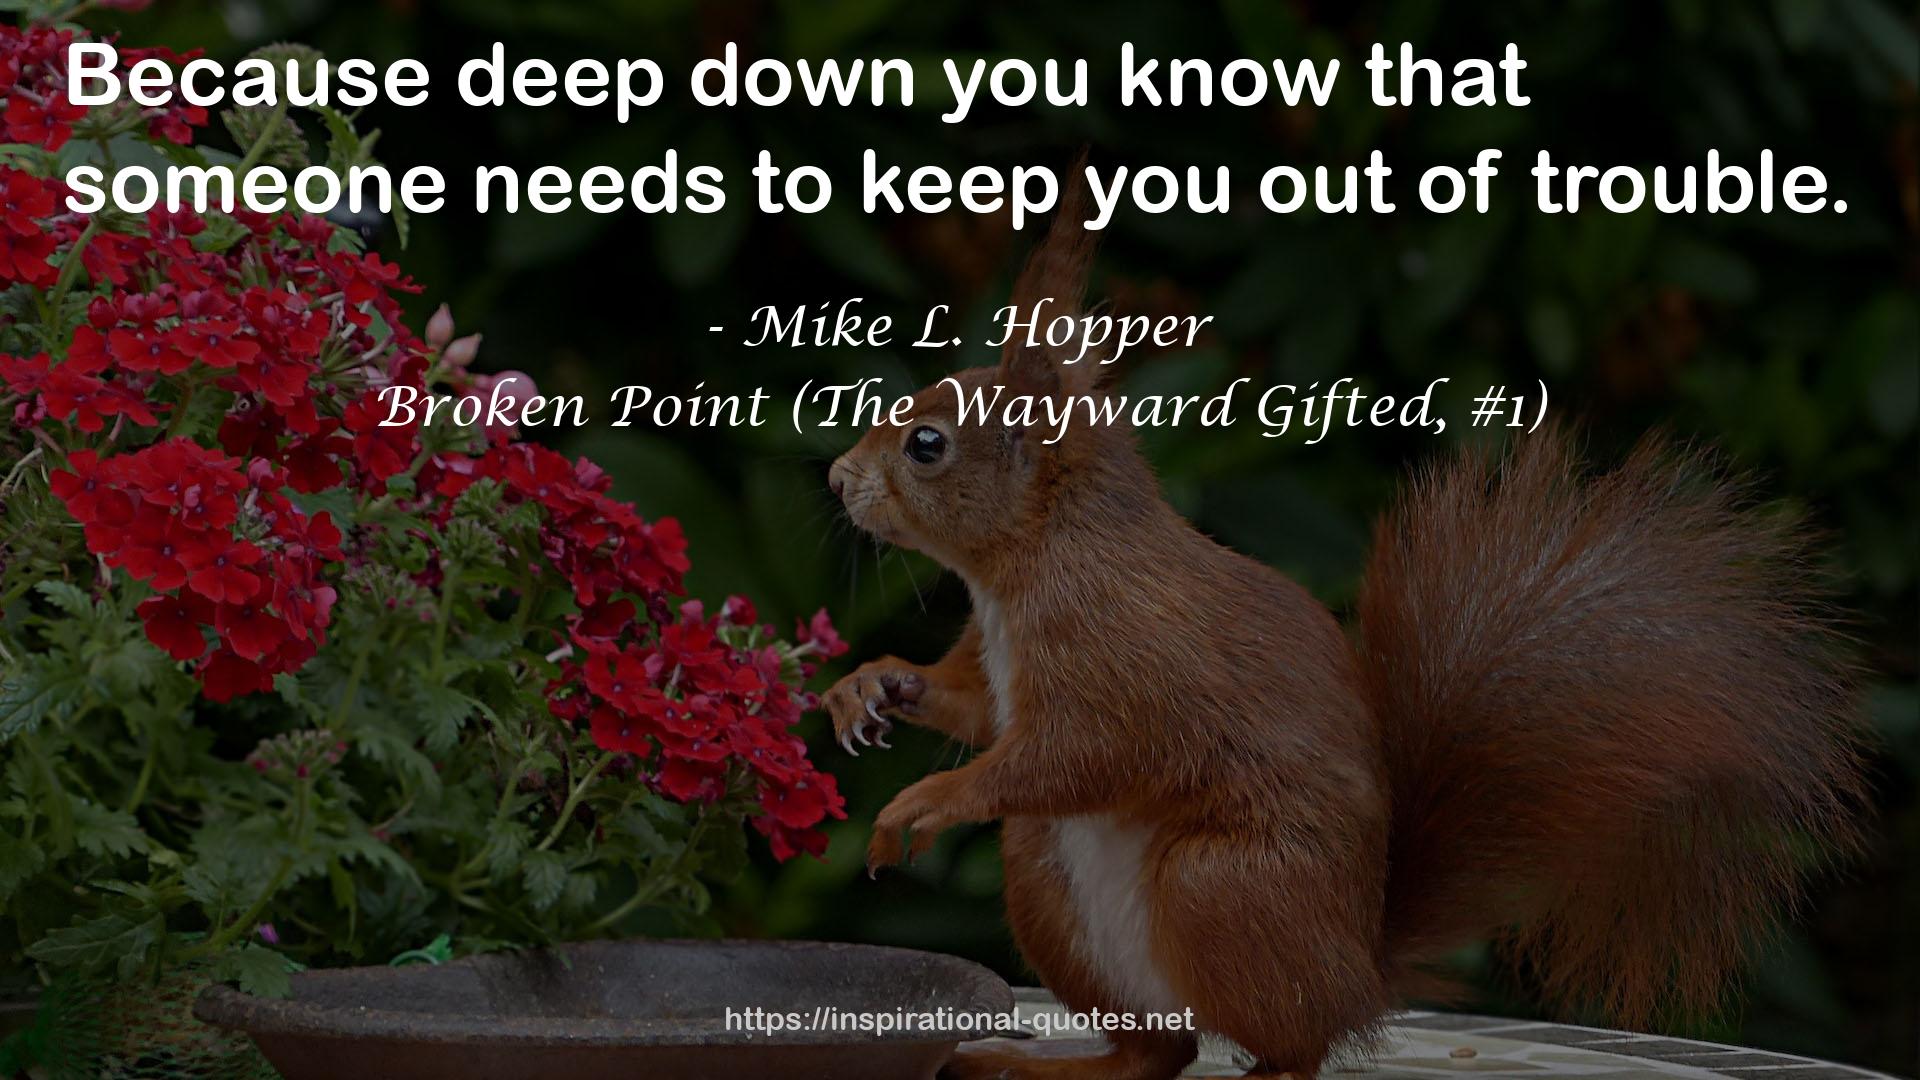 Broken Point (The Wayward Gifted, #1) QUOTES